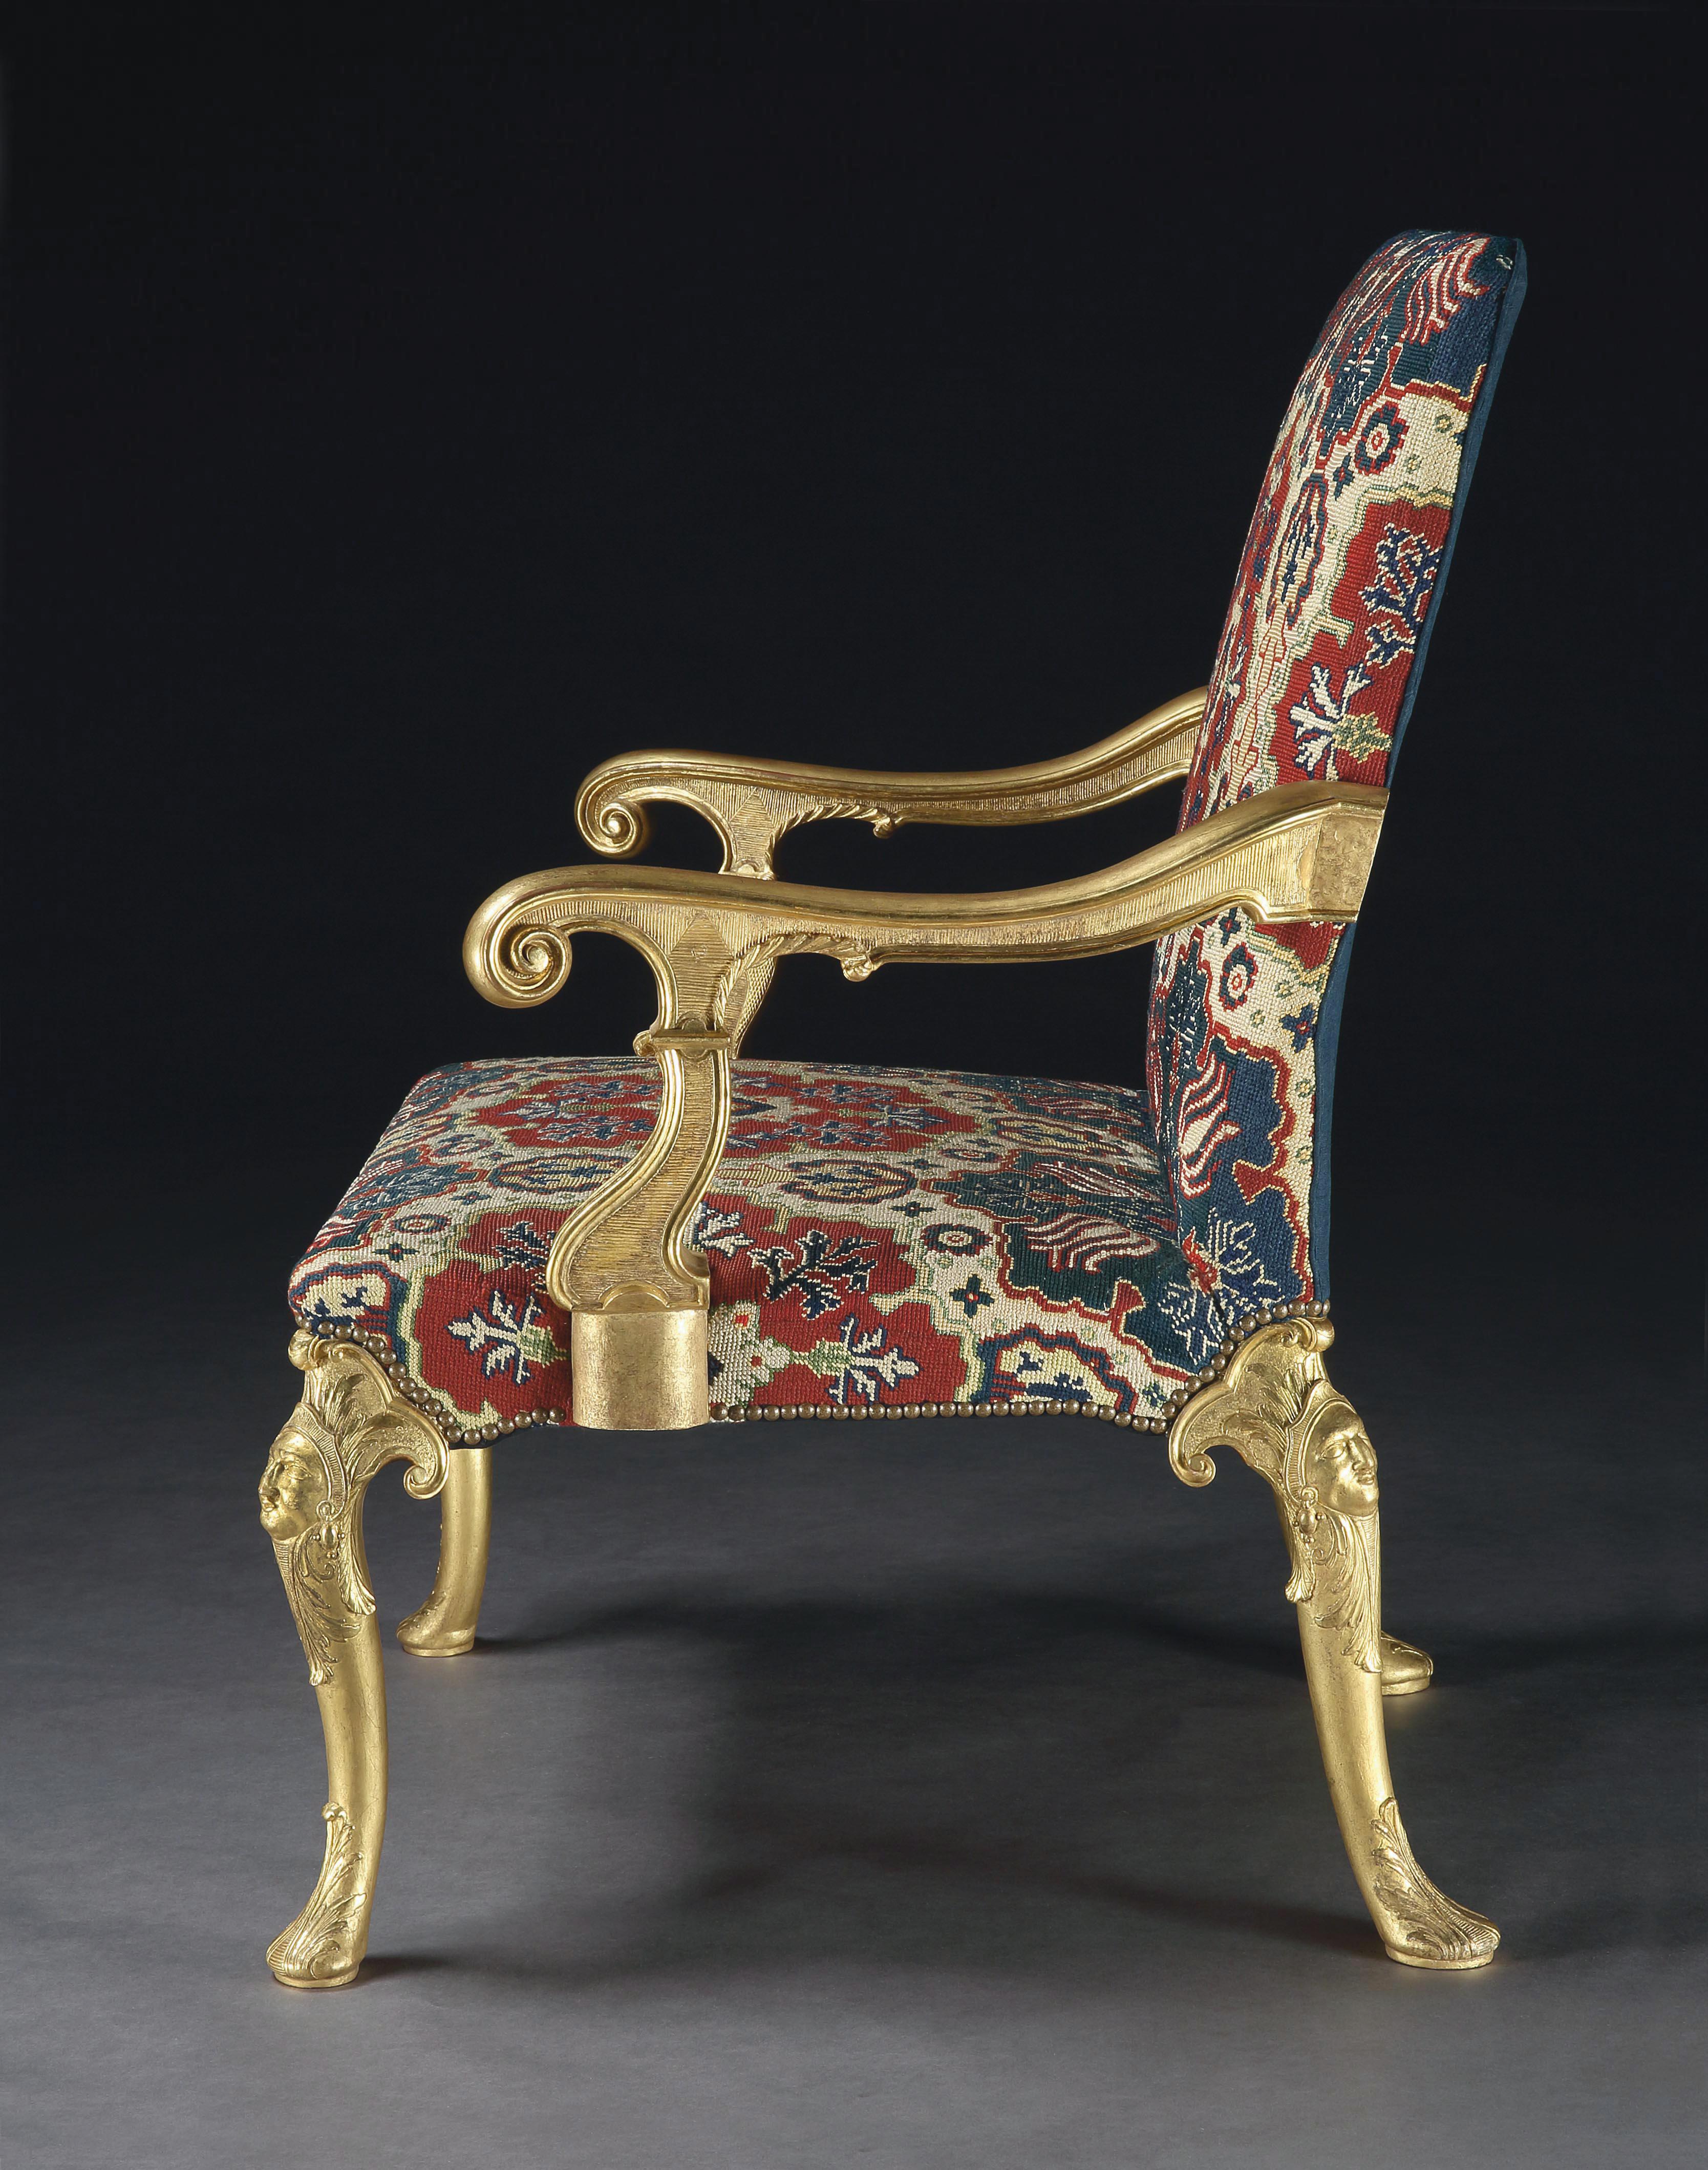 An exceptional, Important and well documented pair of George I Gilt gesso open armchairs. Covered in their original blue and red wool and silk needlework. The pronounced scrolled arms above acanthus carved supports, all standing on cabriole legs